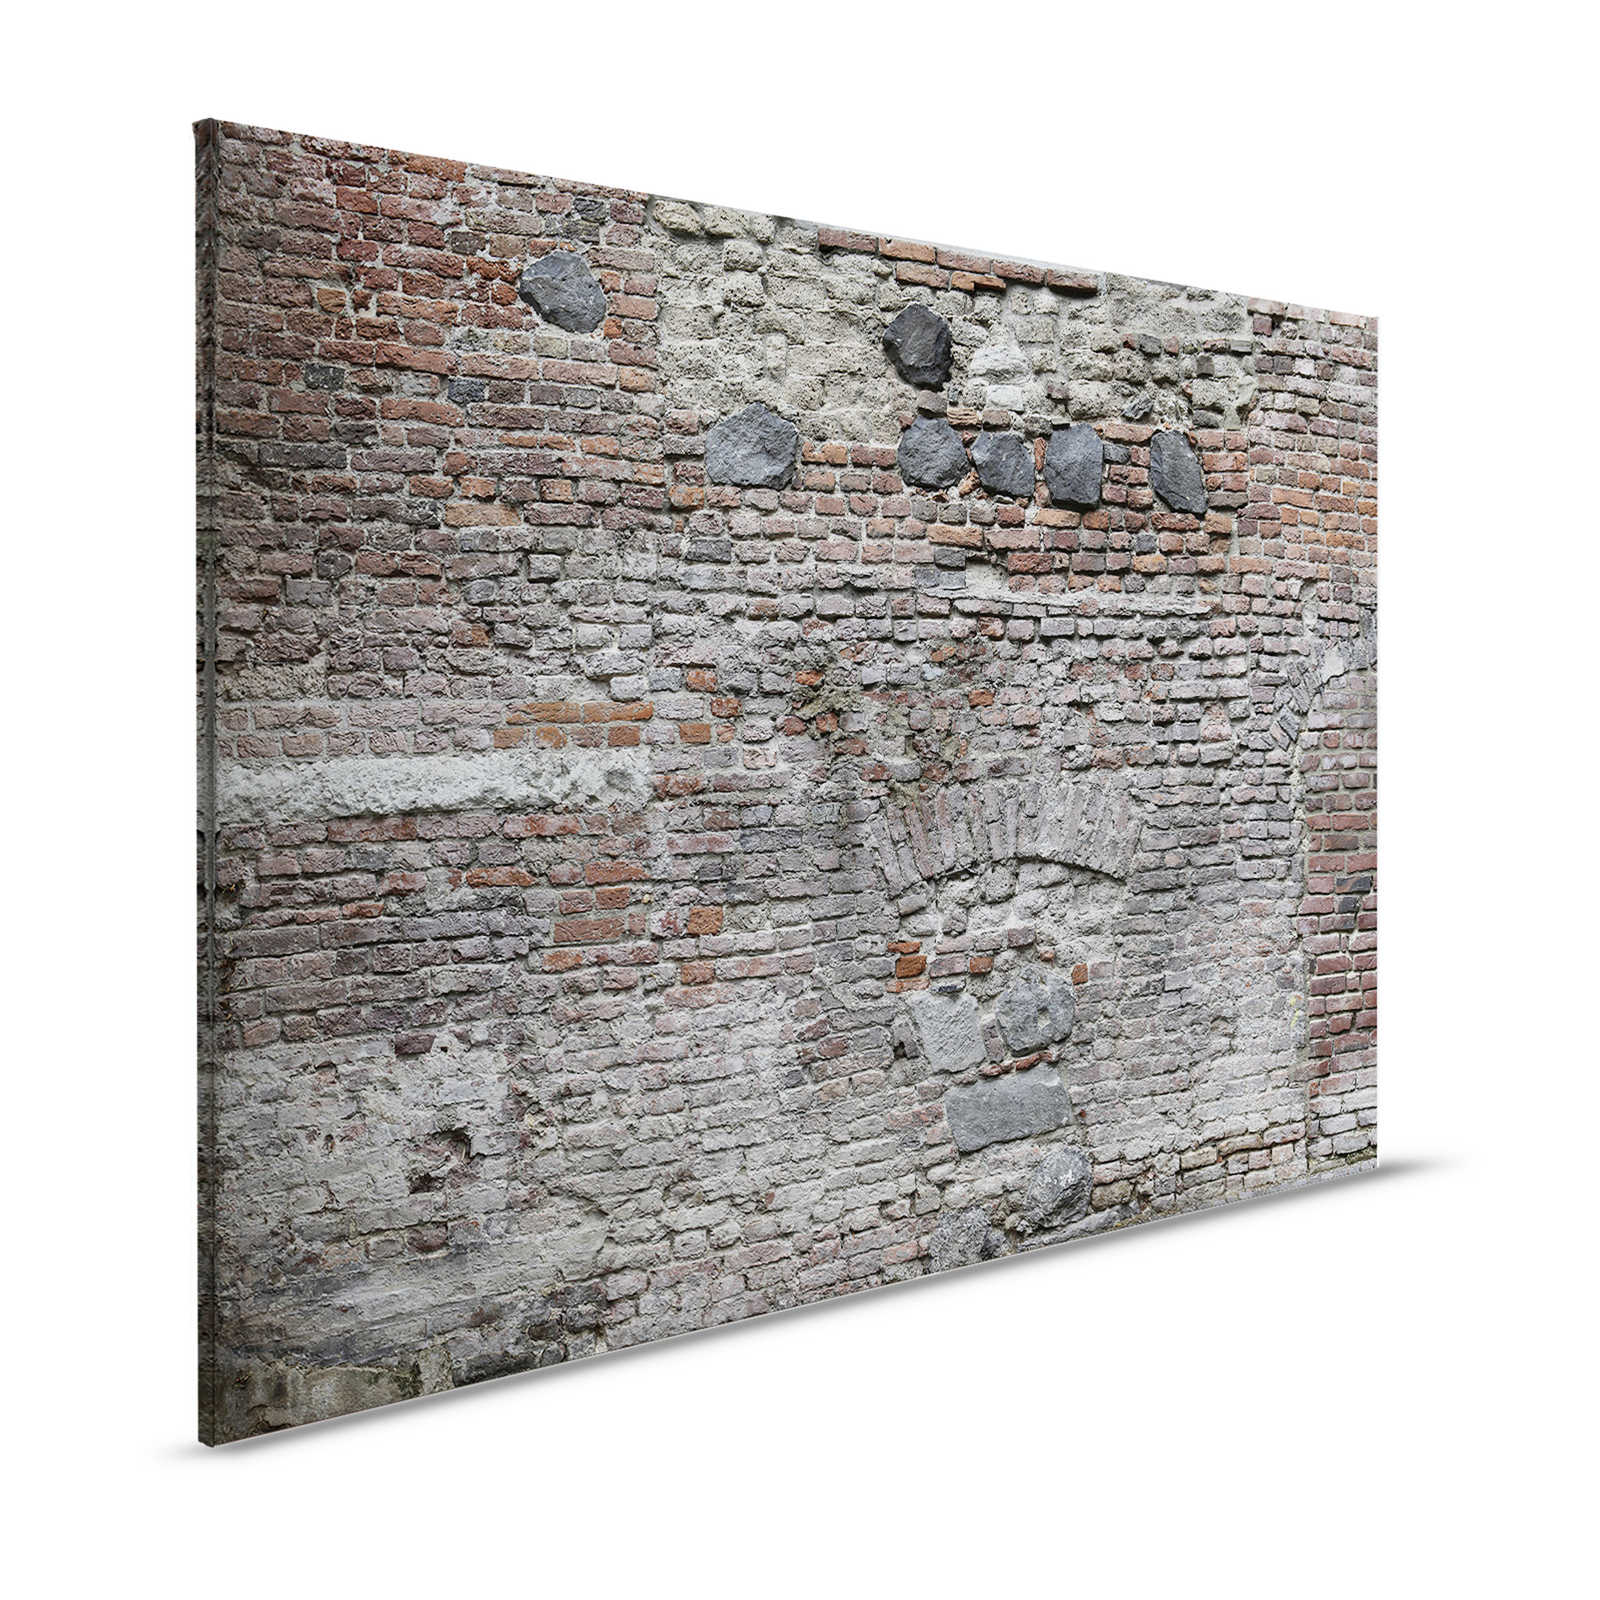 Brick Wall Canvas Painting 3D Optics with Rustic Look - 1.20 m x 0.80 m
